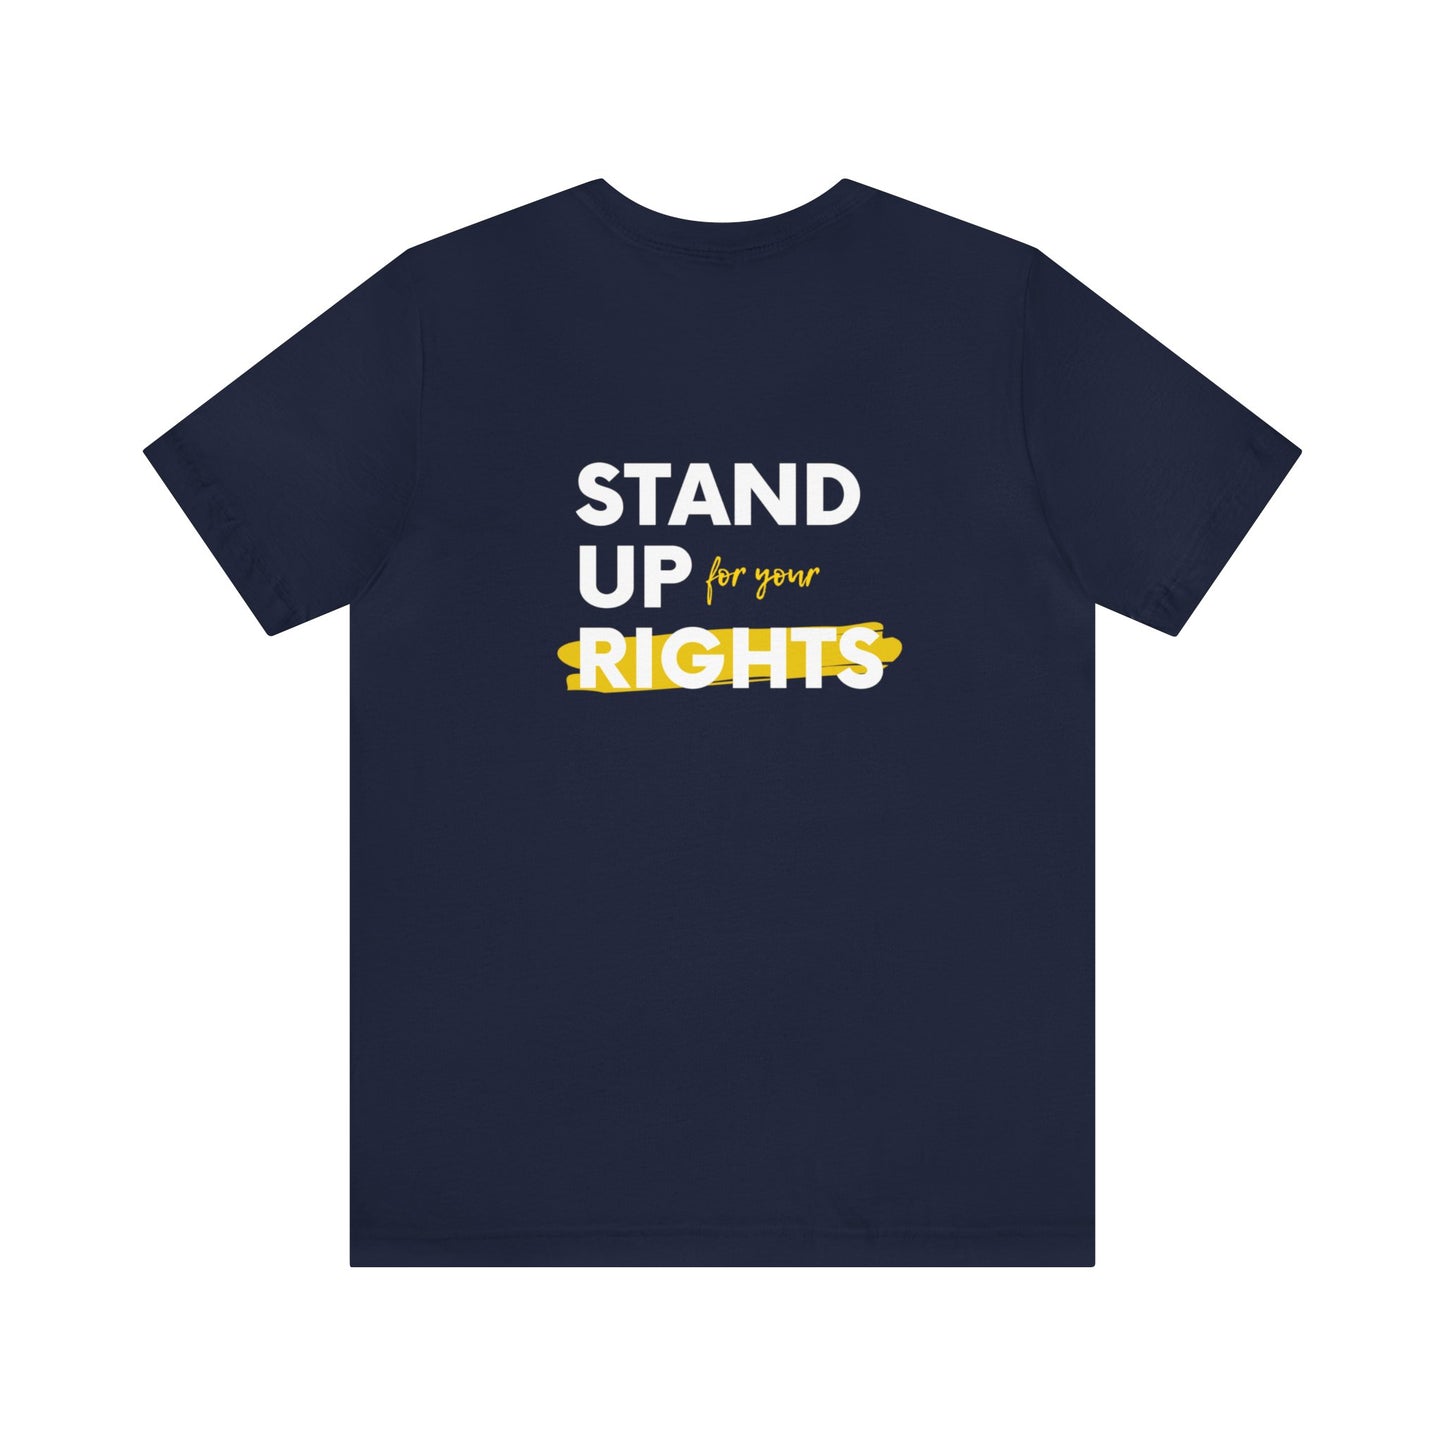 'Stand up for your rights' Unisex Cotton T-shirt - Human Rights Fighter Collection